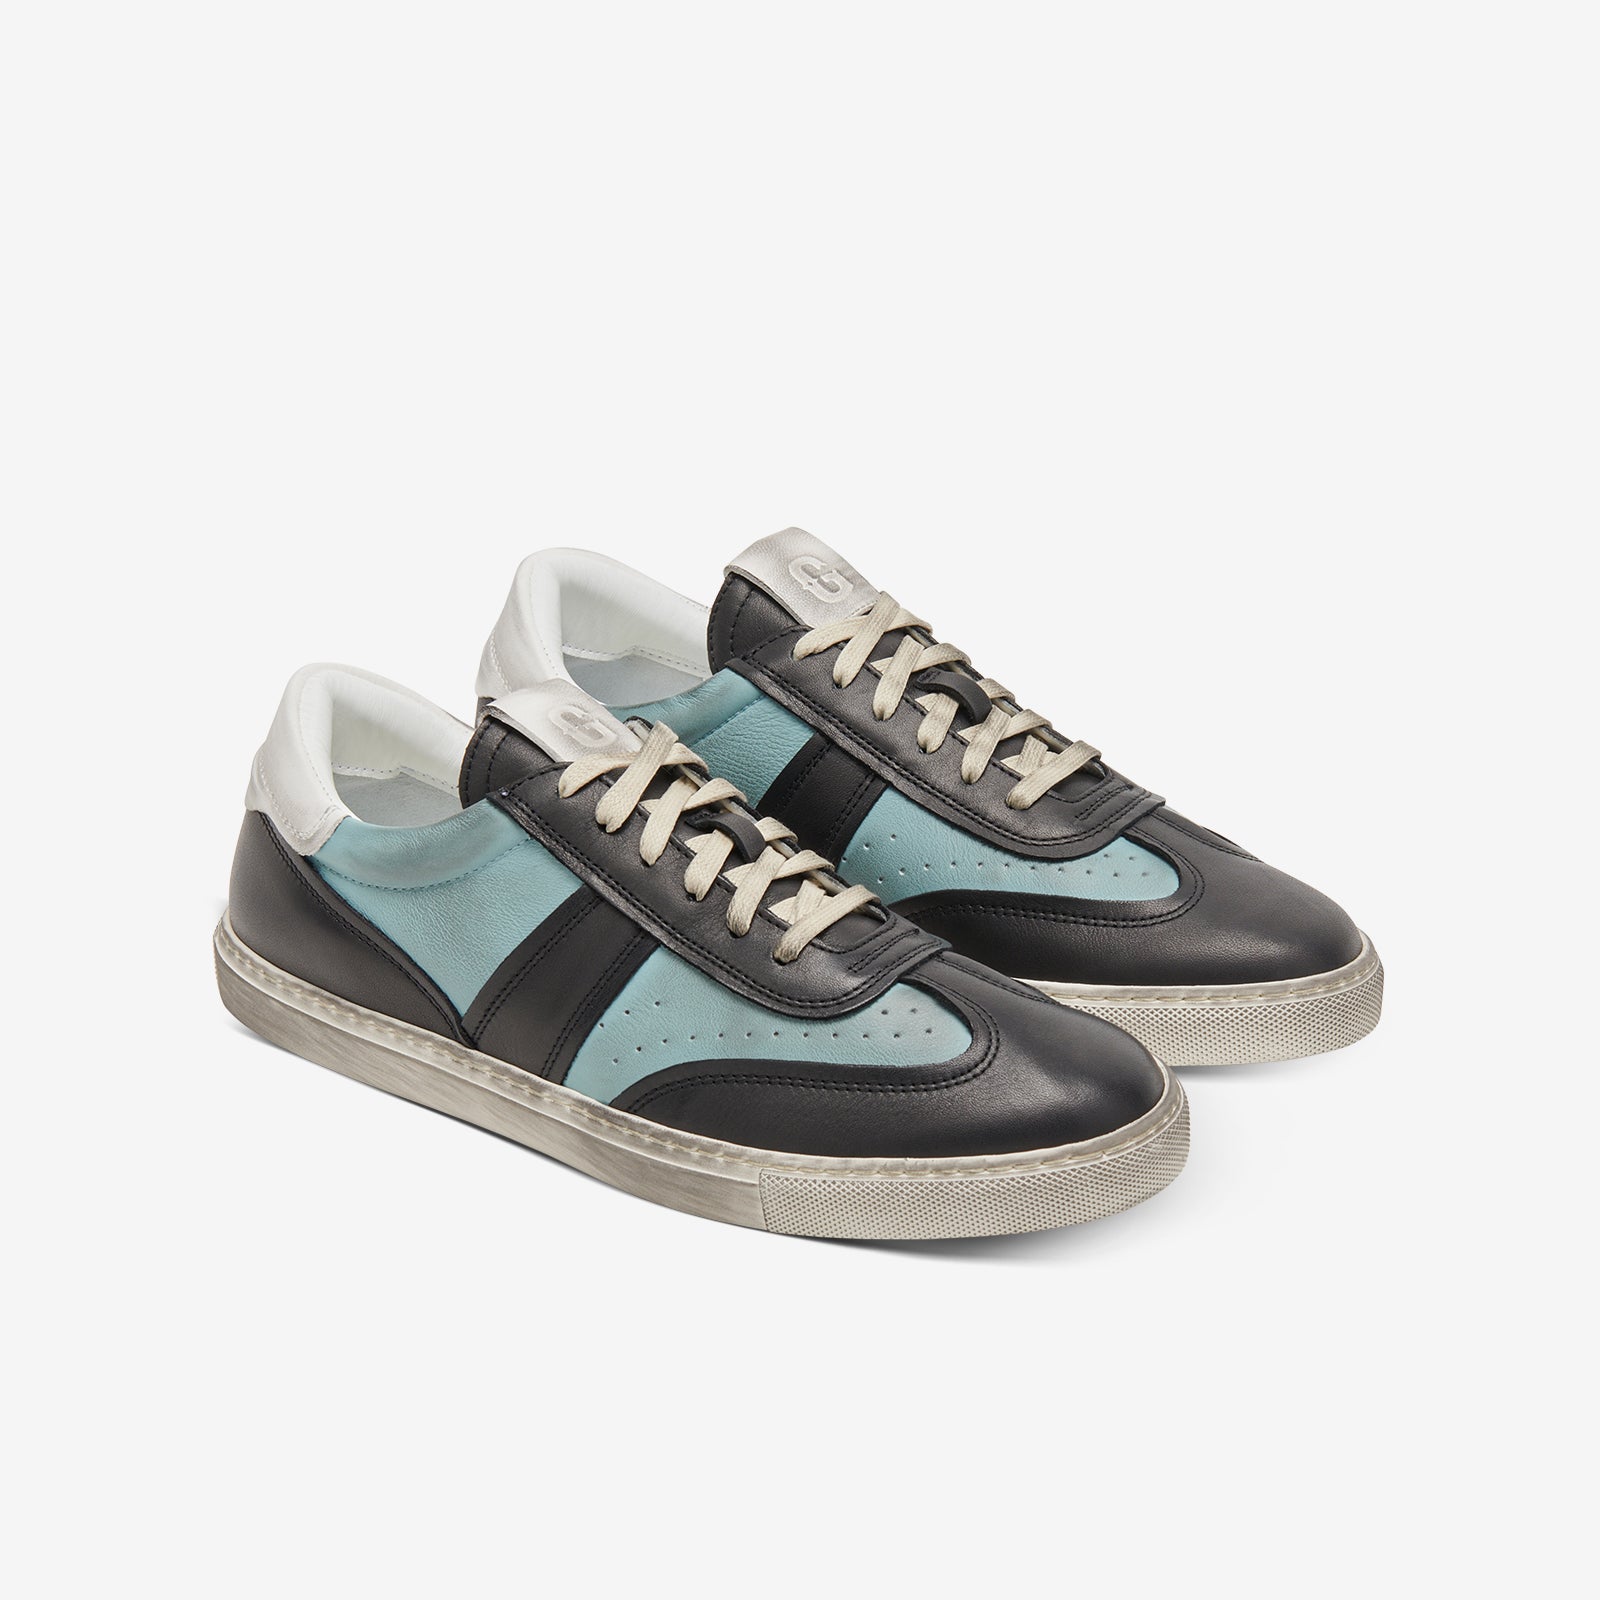 Greats - The Charlie Distressed - Blue Multi - Men's Shoe – GREATS